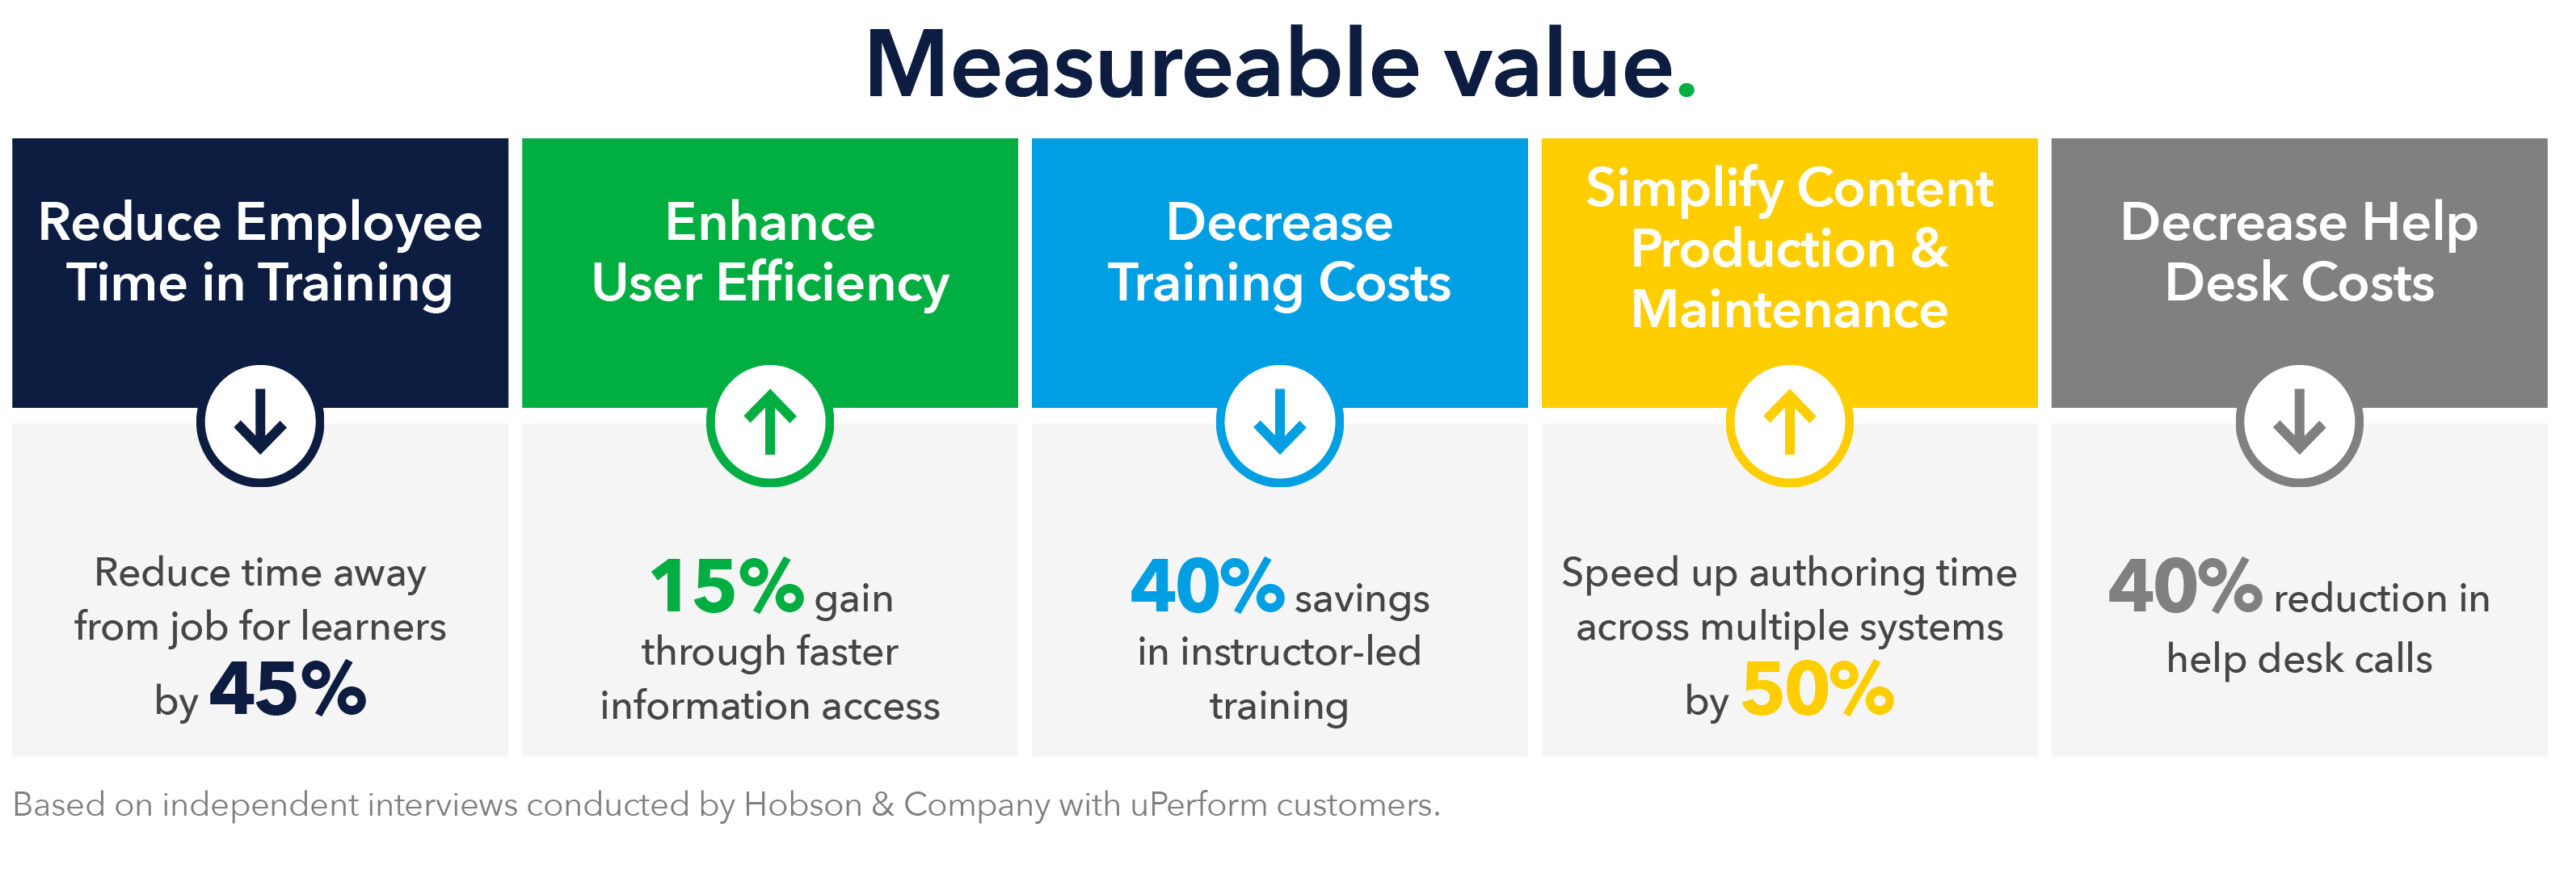 uPerform customers measurable value in percentages